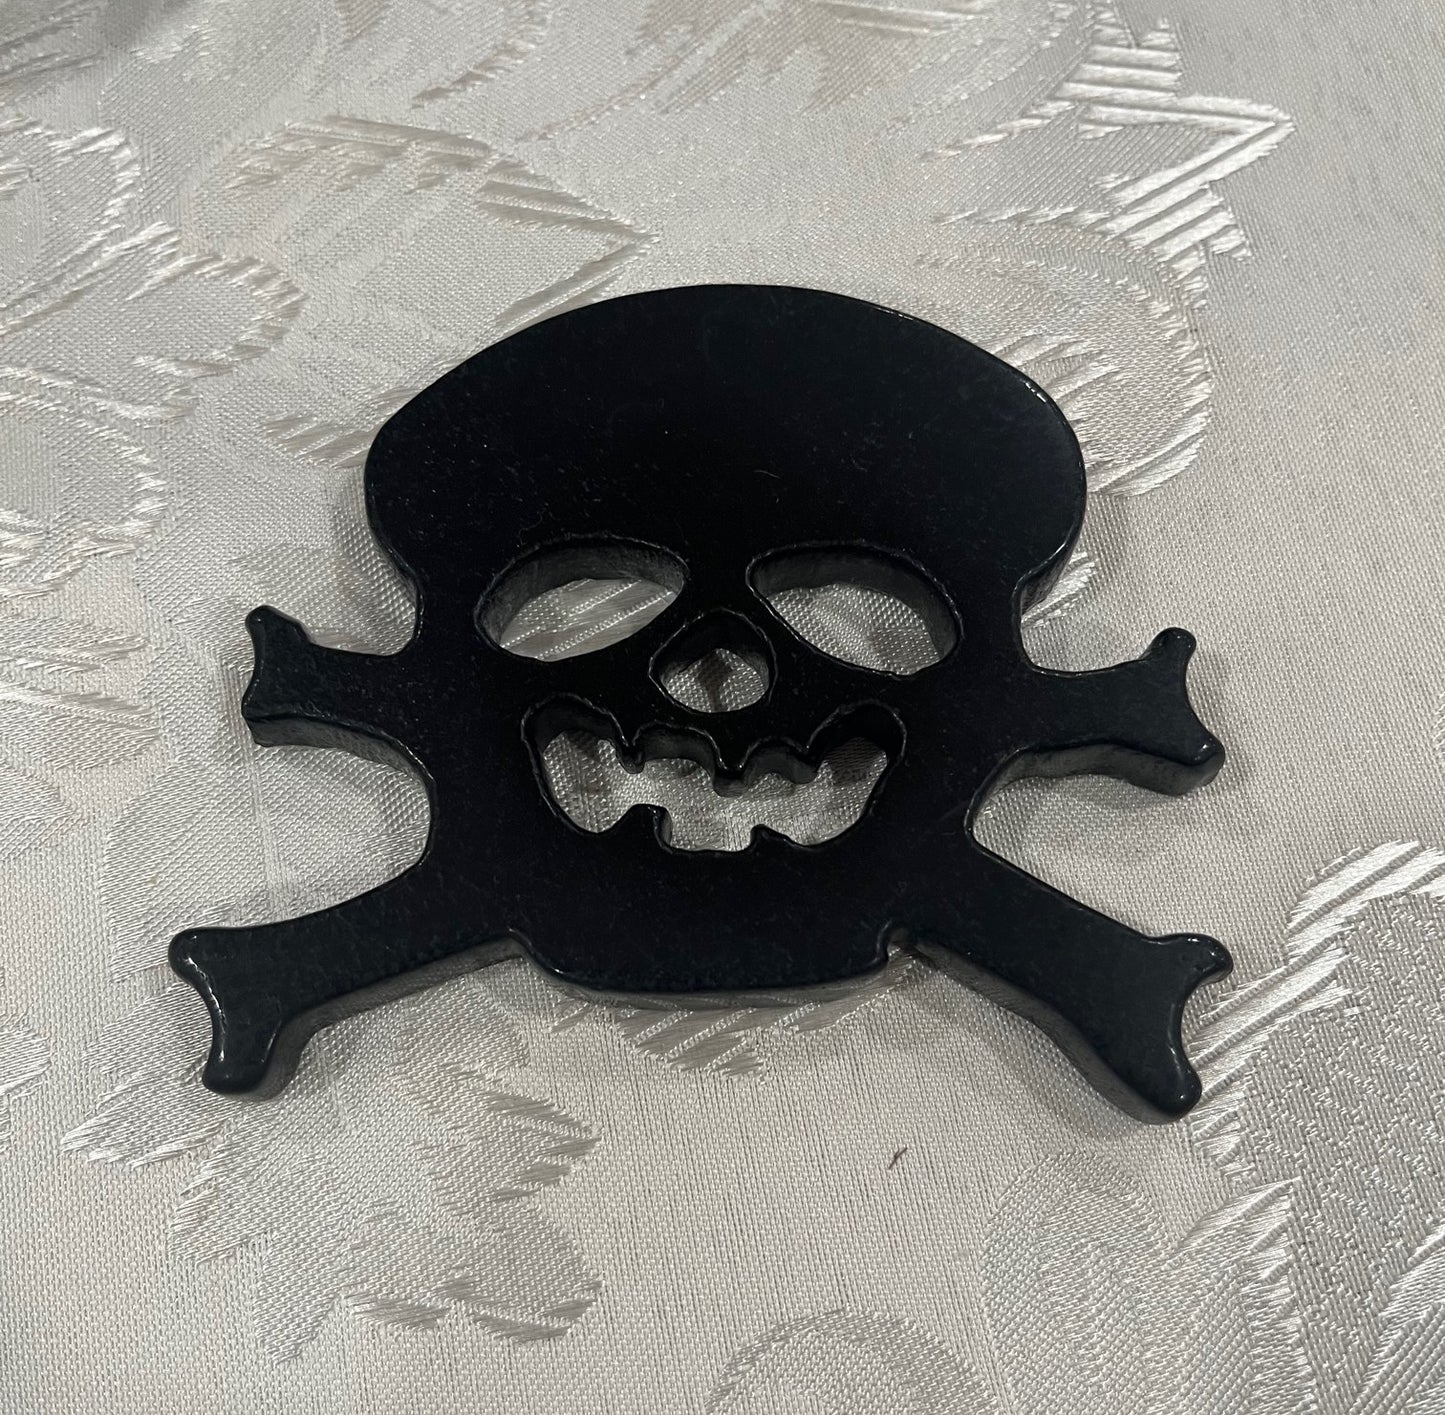 Skull and crossbones crystal/stone carving